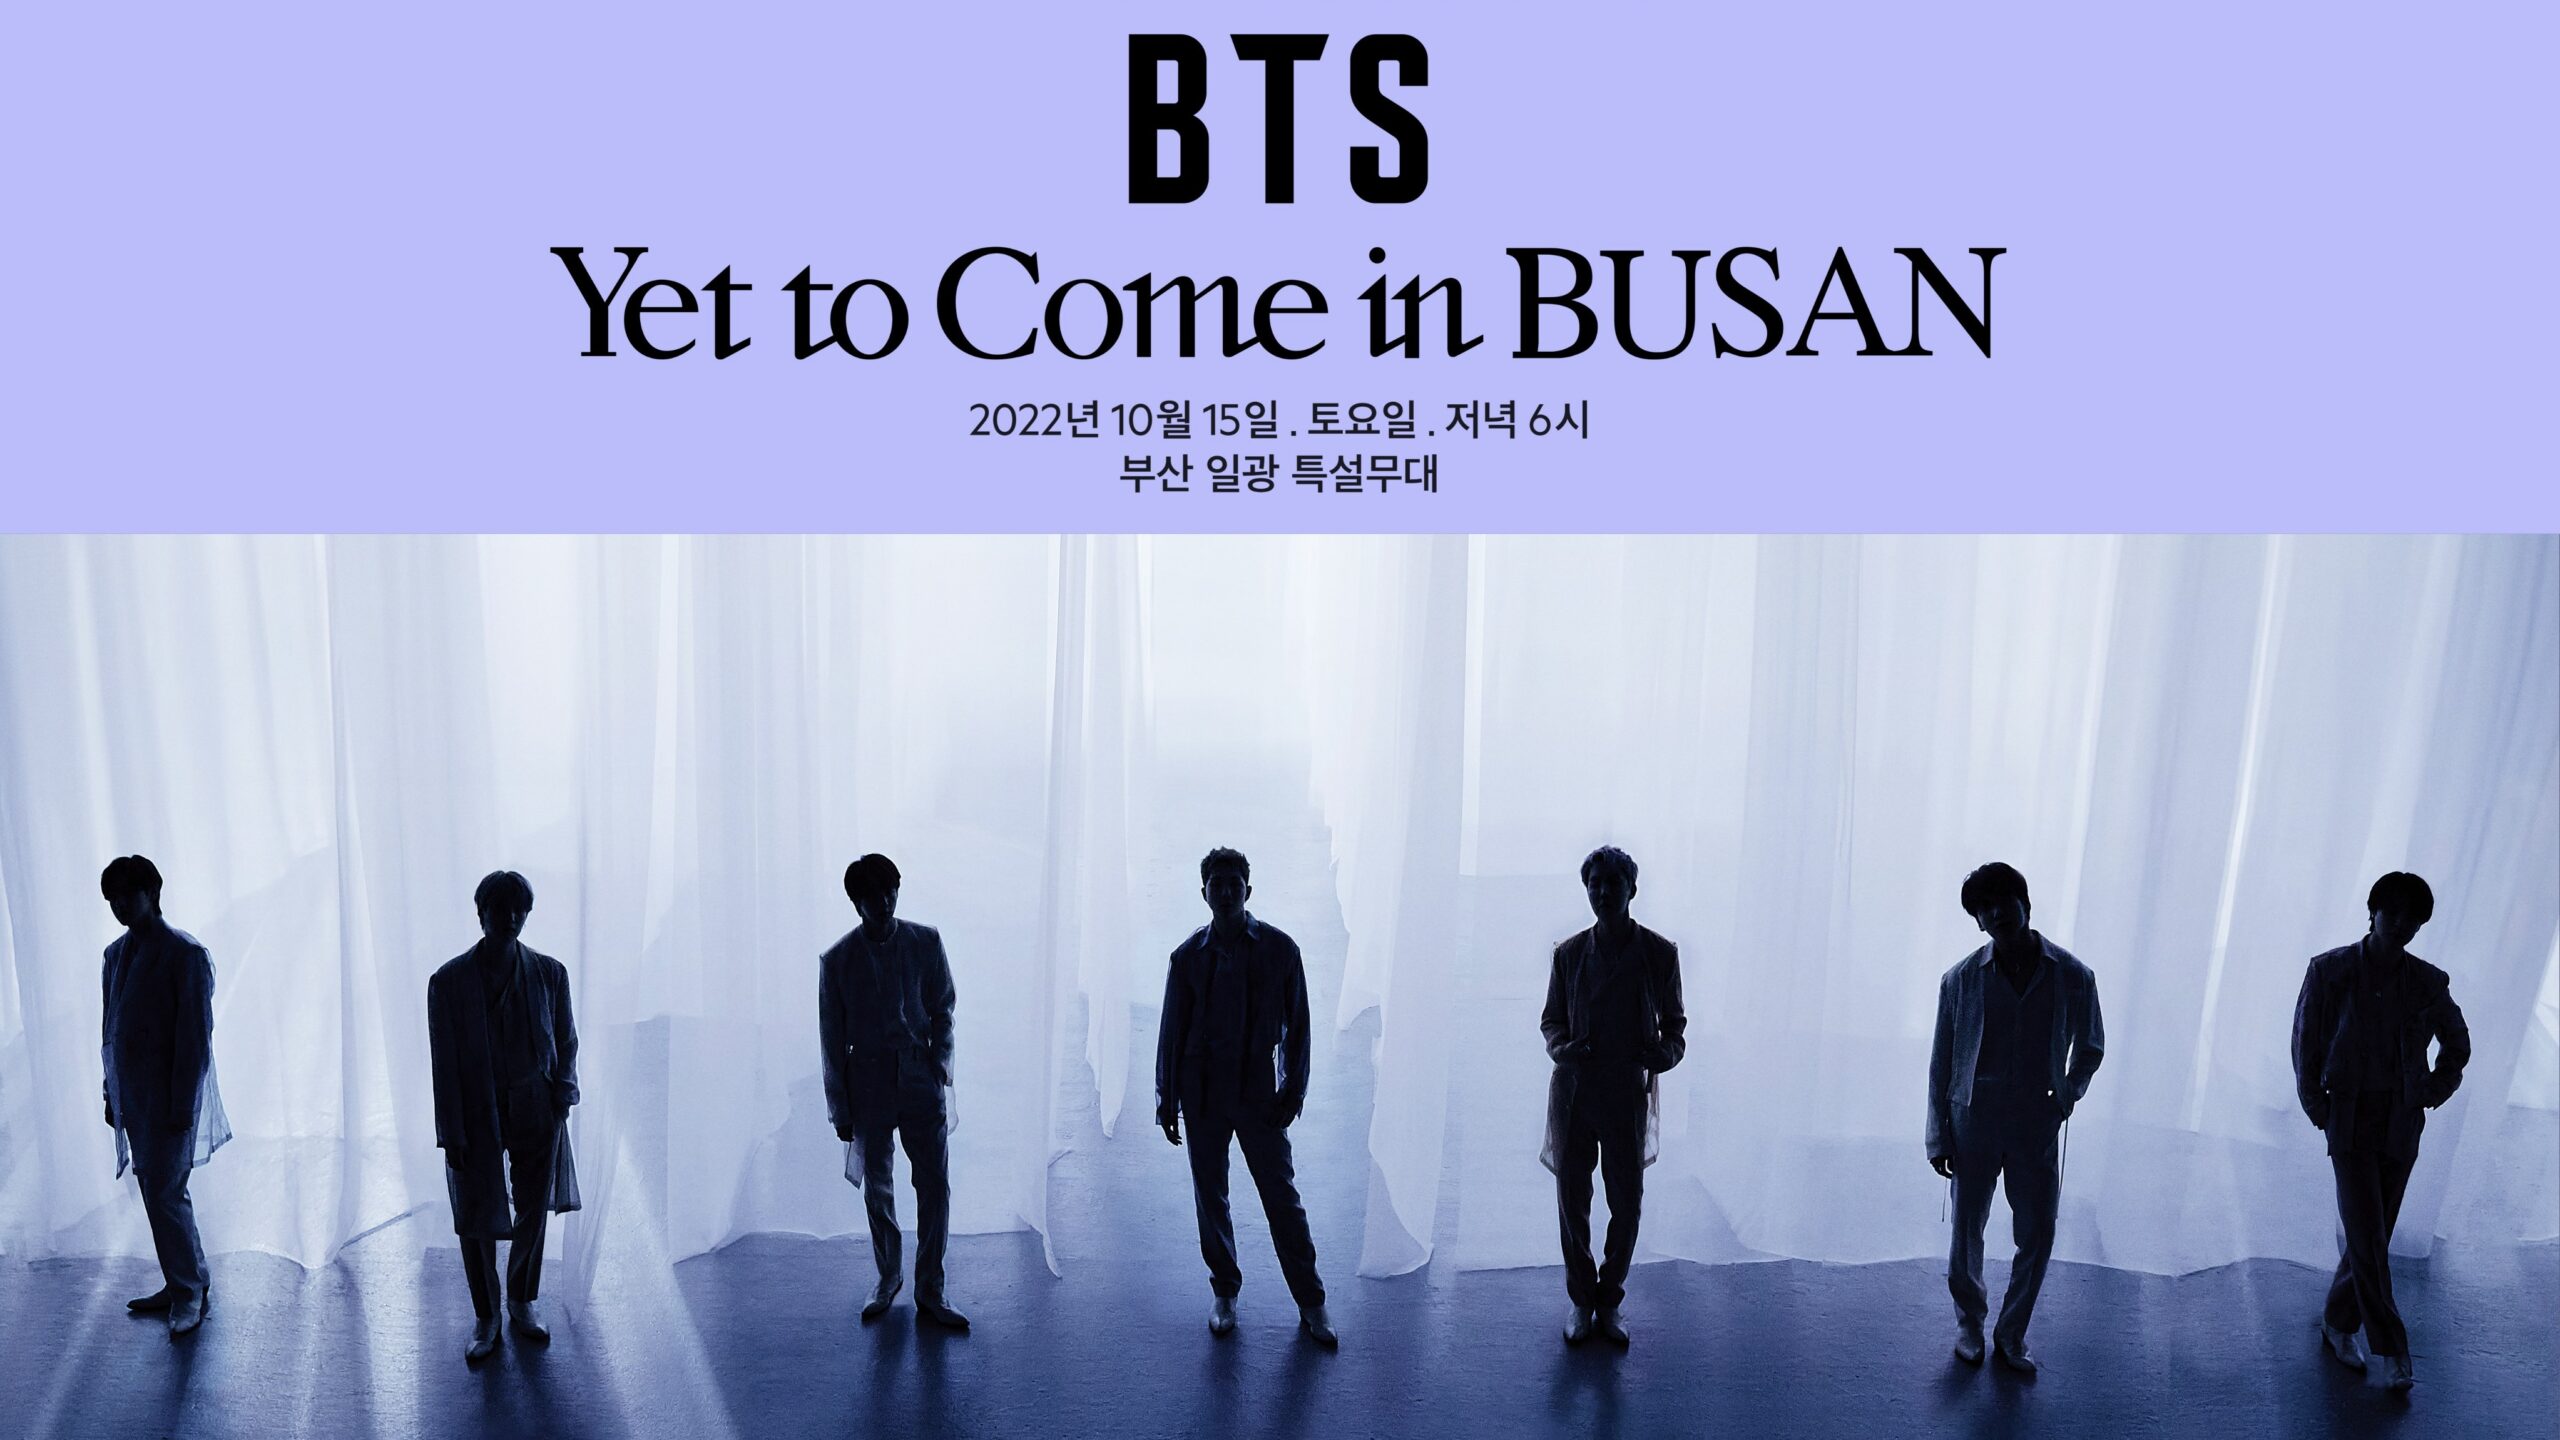 BTS YET TO COME IN BUSAN 会場限定 トレカ テヒョン-